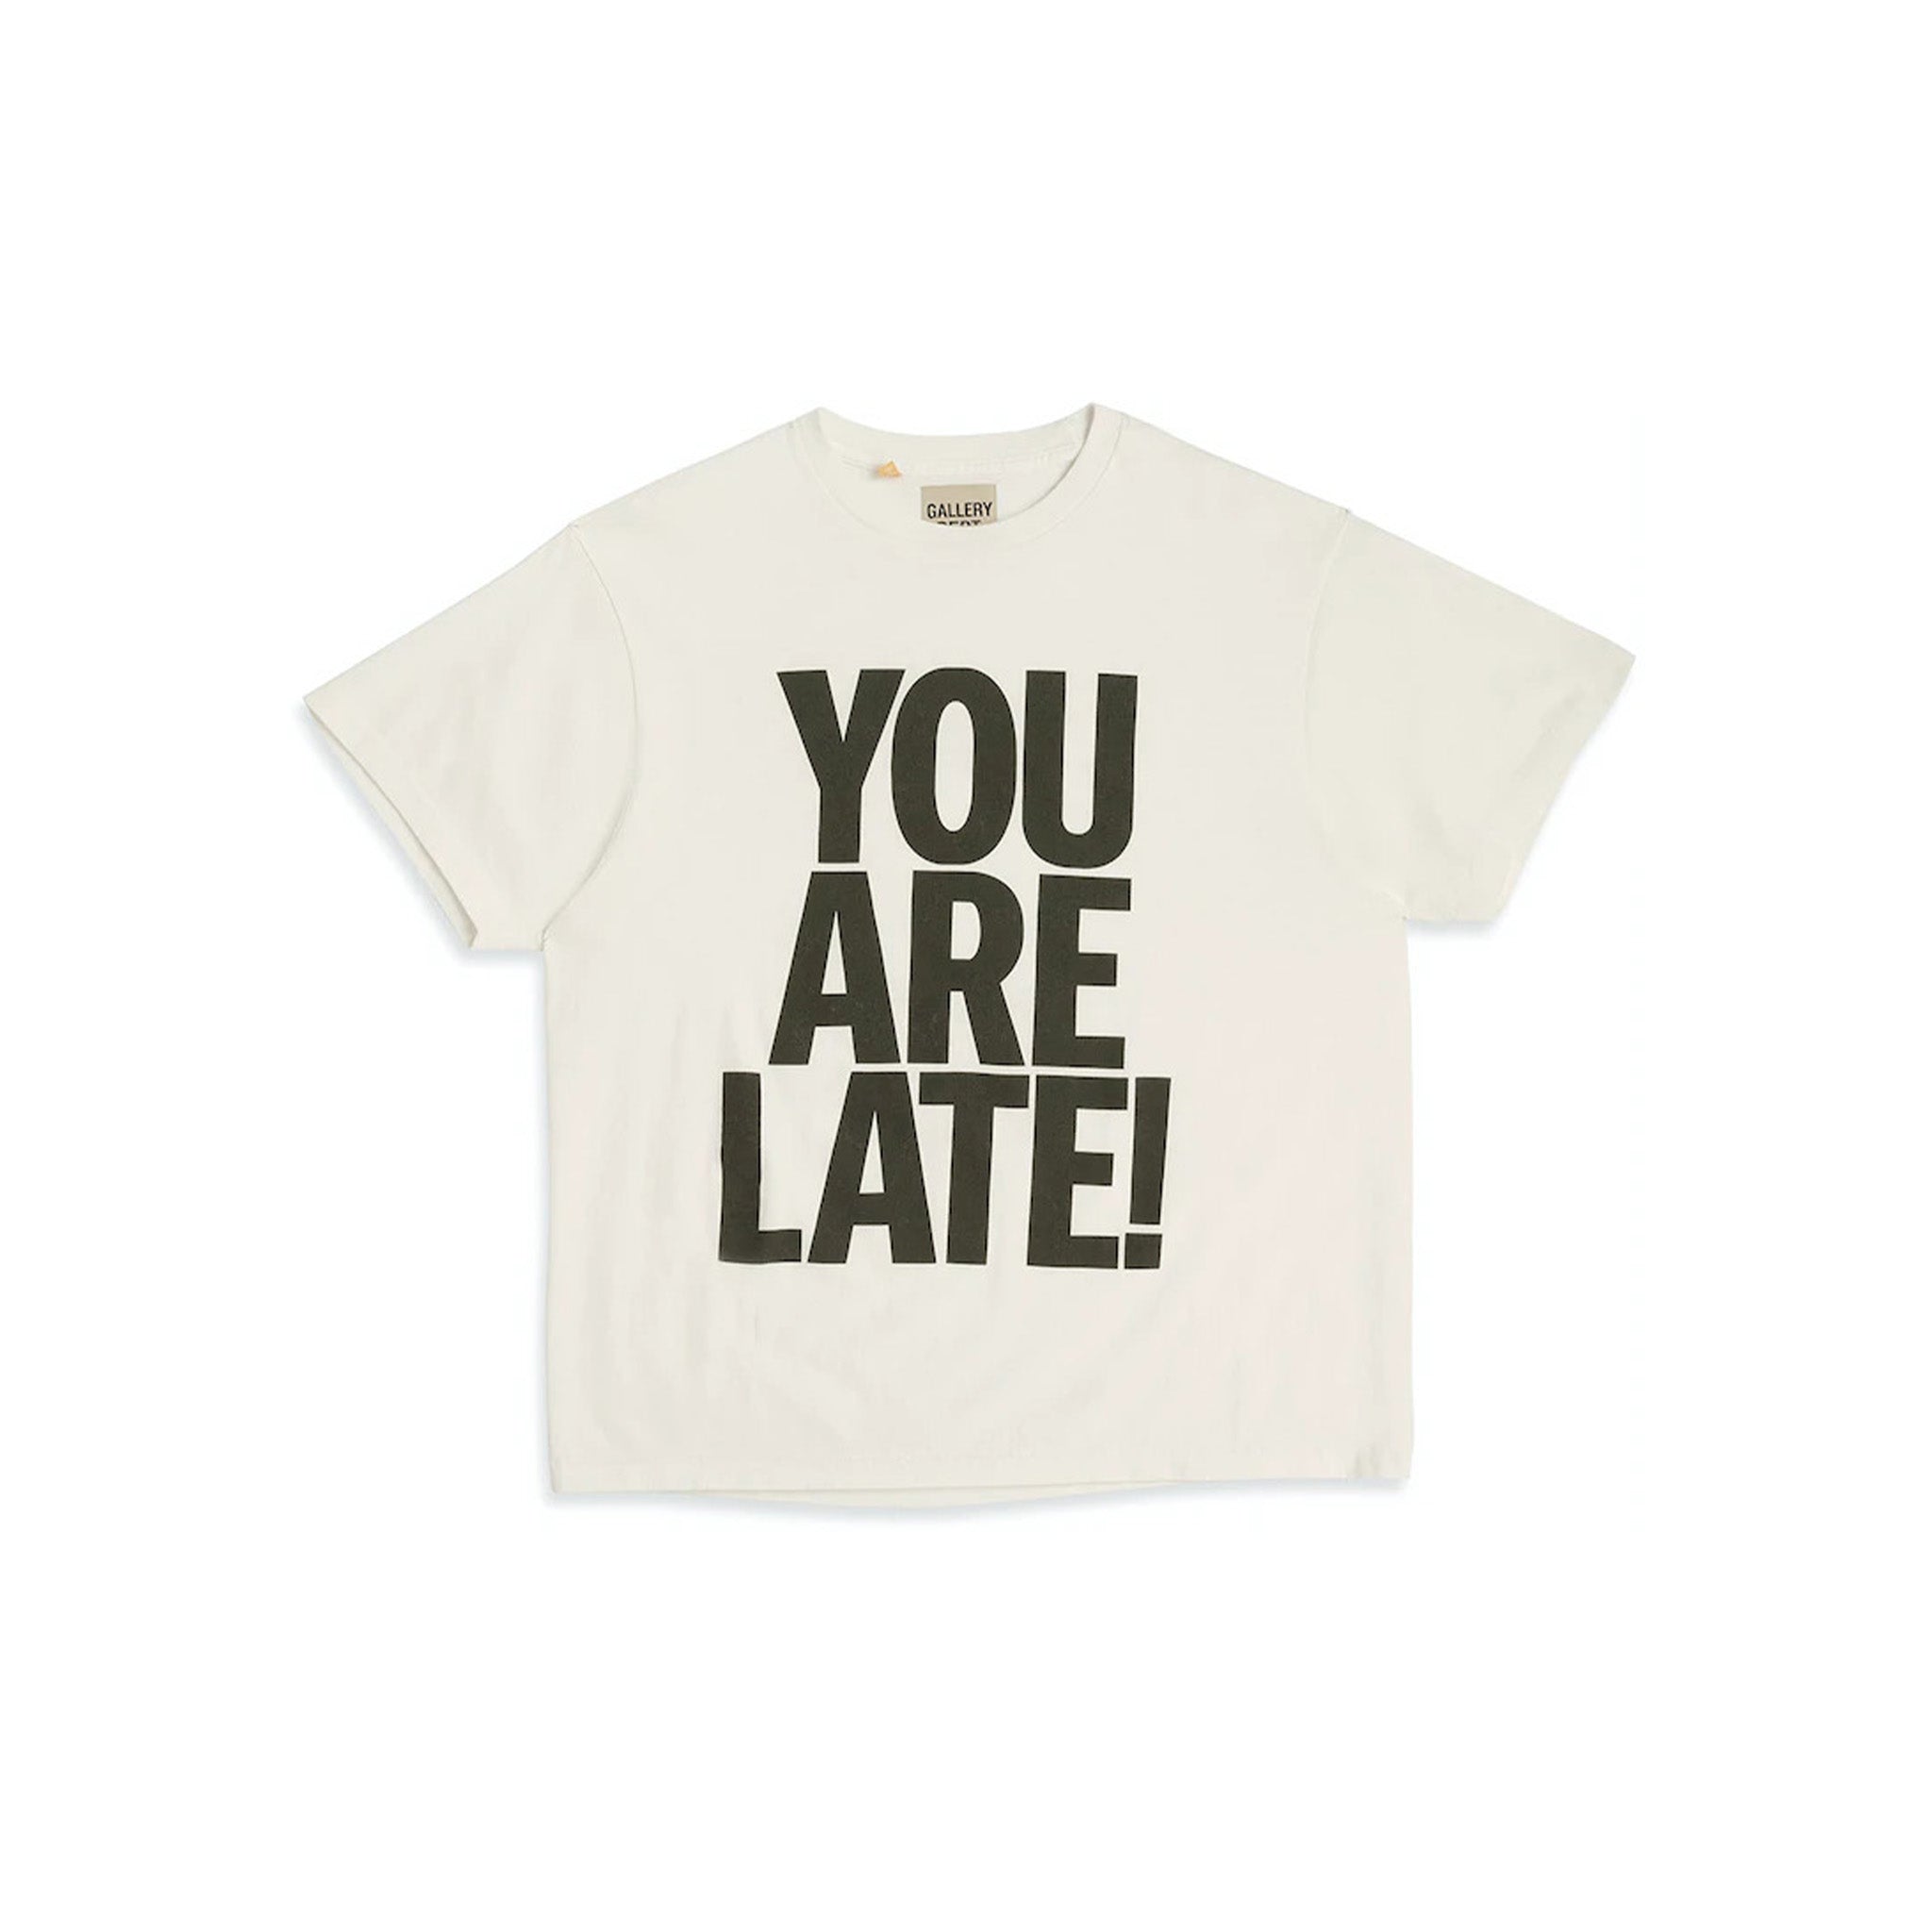 Gallery Dept. ATK You Are Late T-Shirt White